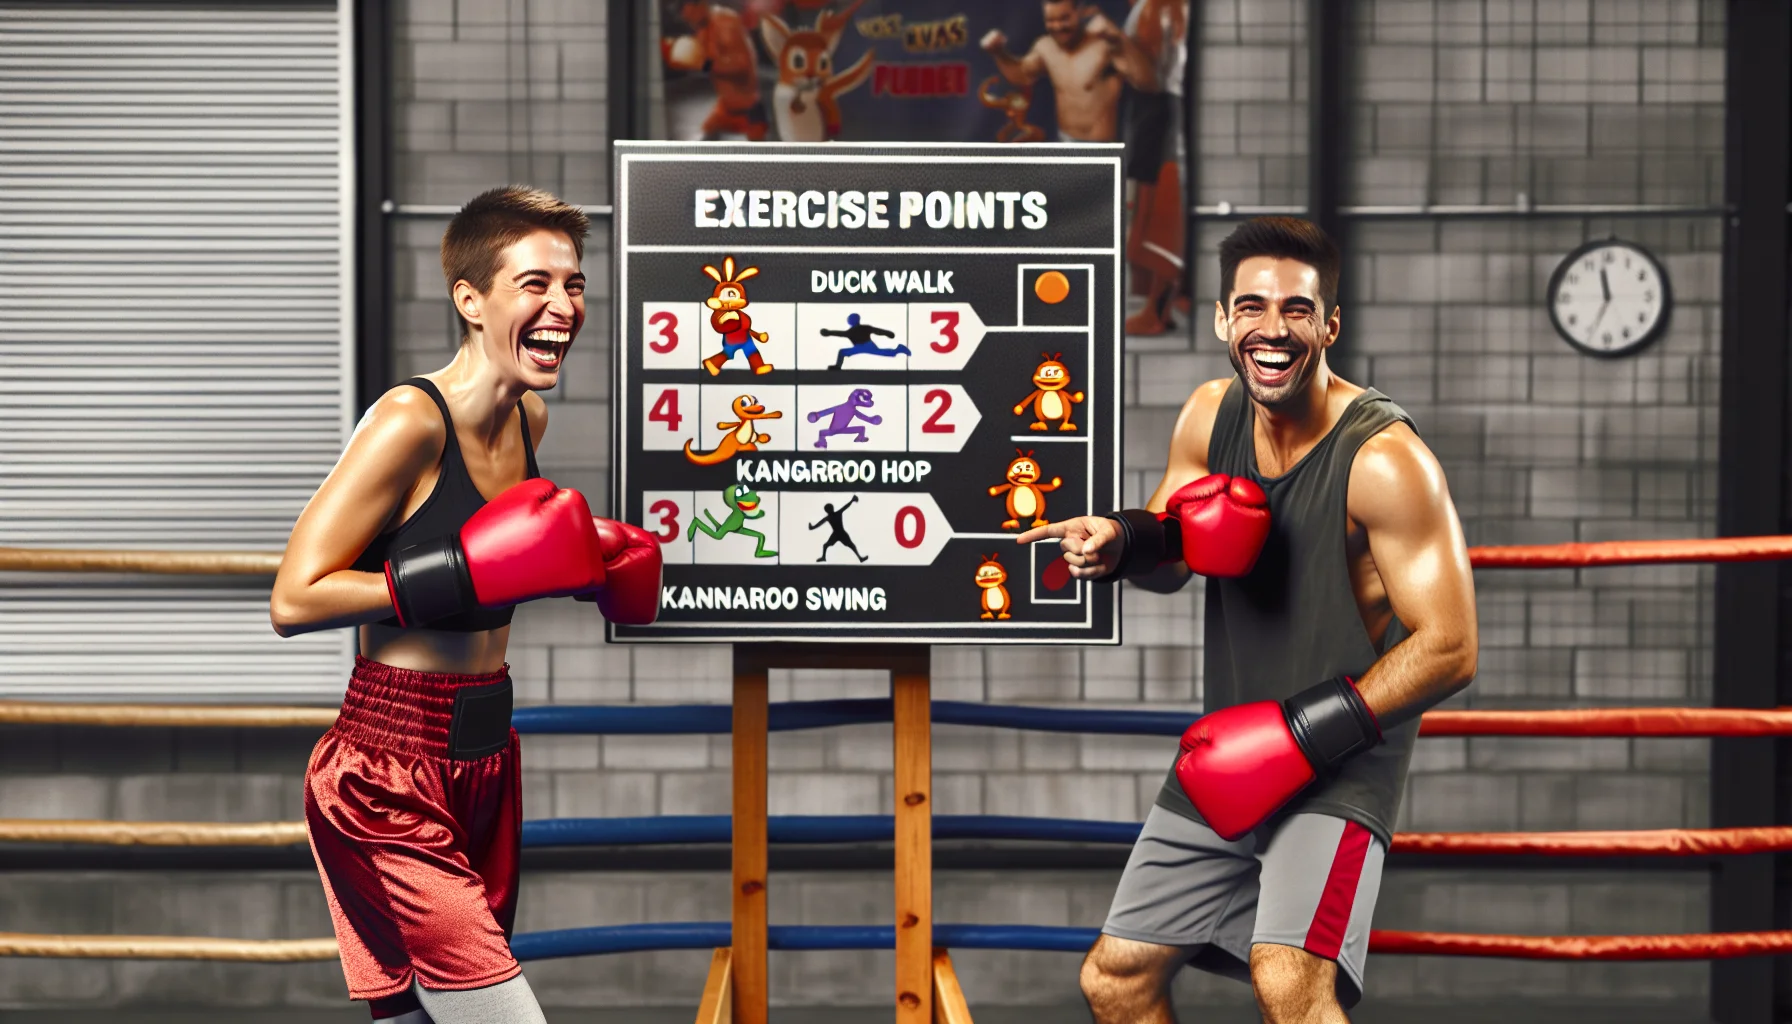 Create a humor-infused scene where a Caucasian female kickboxer and a Hispanic male mixed martial arts (MMA) fighter are in a friendly duel. They are both in a boxing ring, wearing their respective gear, but instead of the usual intense expressions, they are both laughing and pointing at a scoreboard that shows exercise points won by funny moves such as 'Duck Walk', 'Kangaroo Hop' and 'Monkey Swing'. This scene is intended to highlight the enjoyment aspect of physical exercise and encourage people to participate.